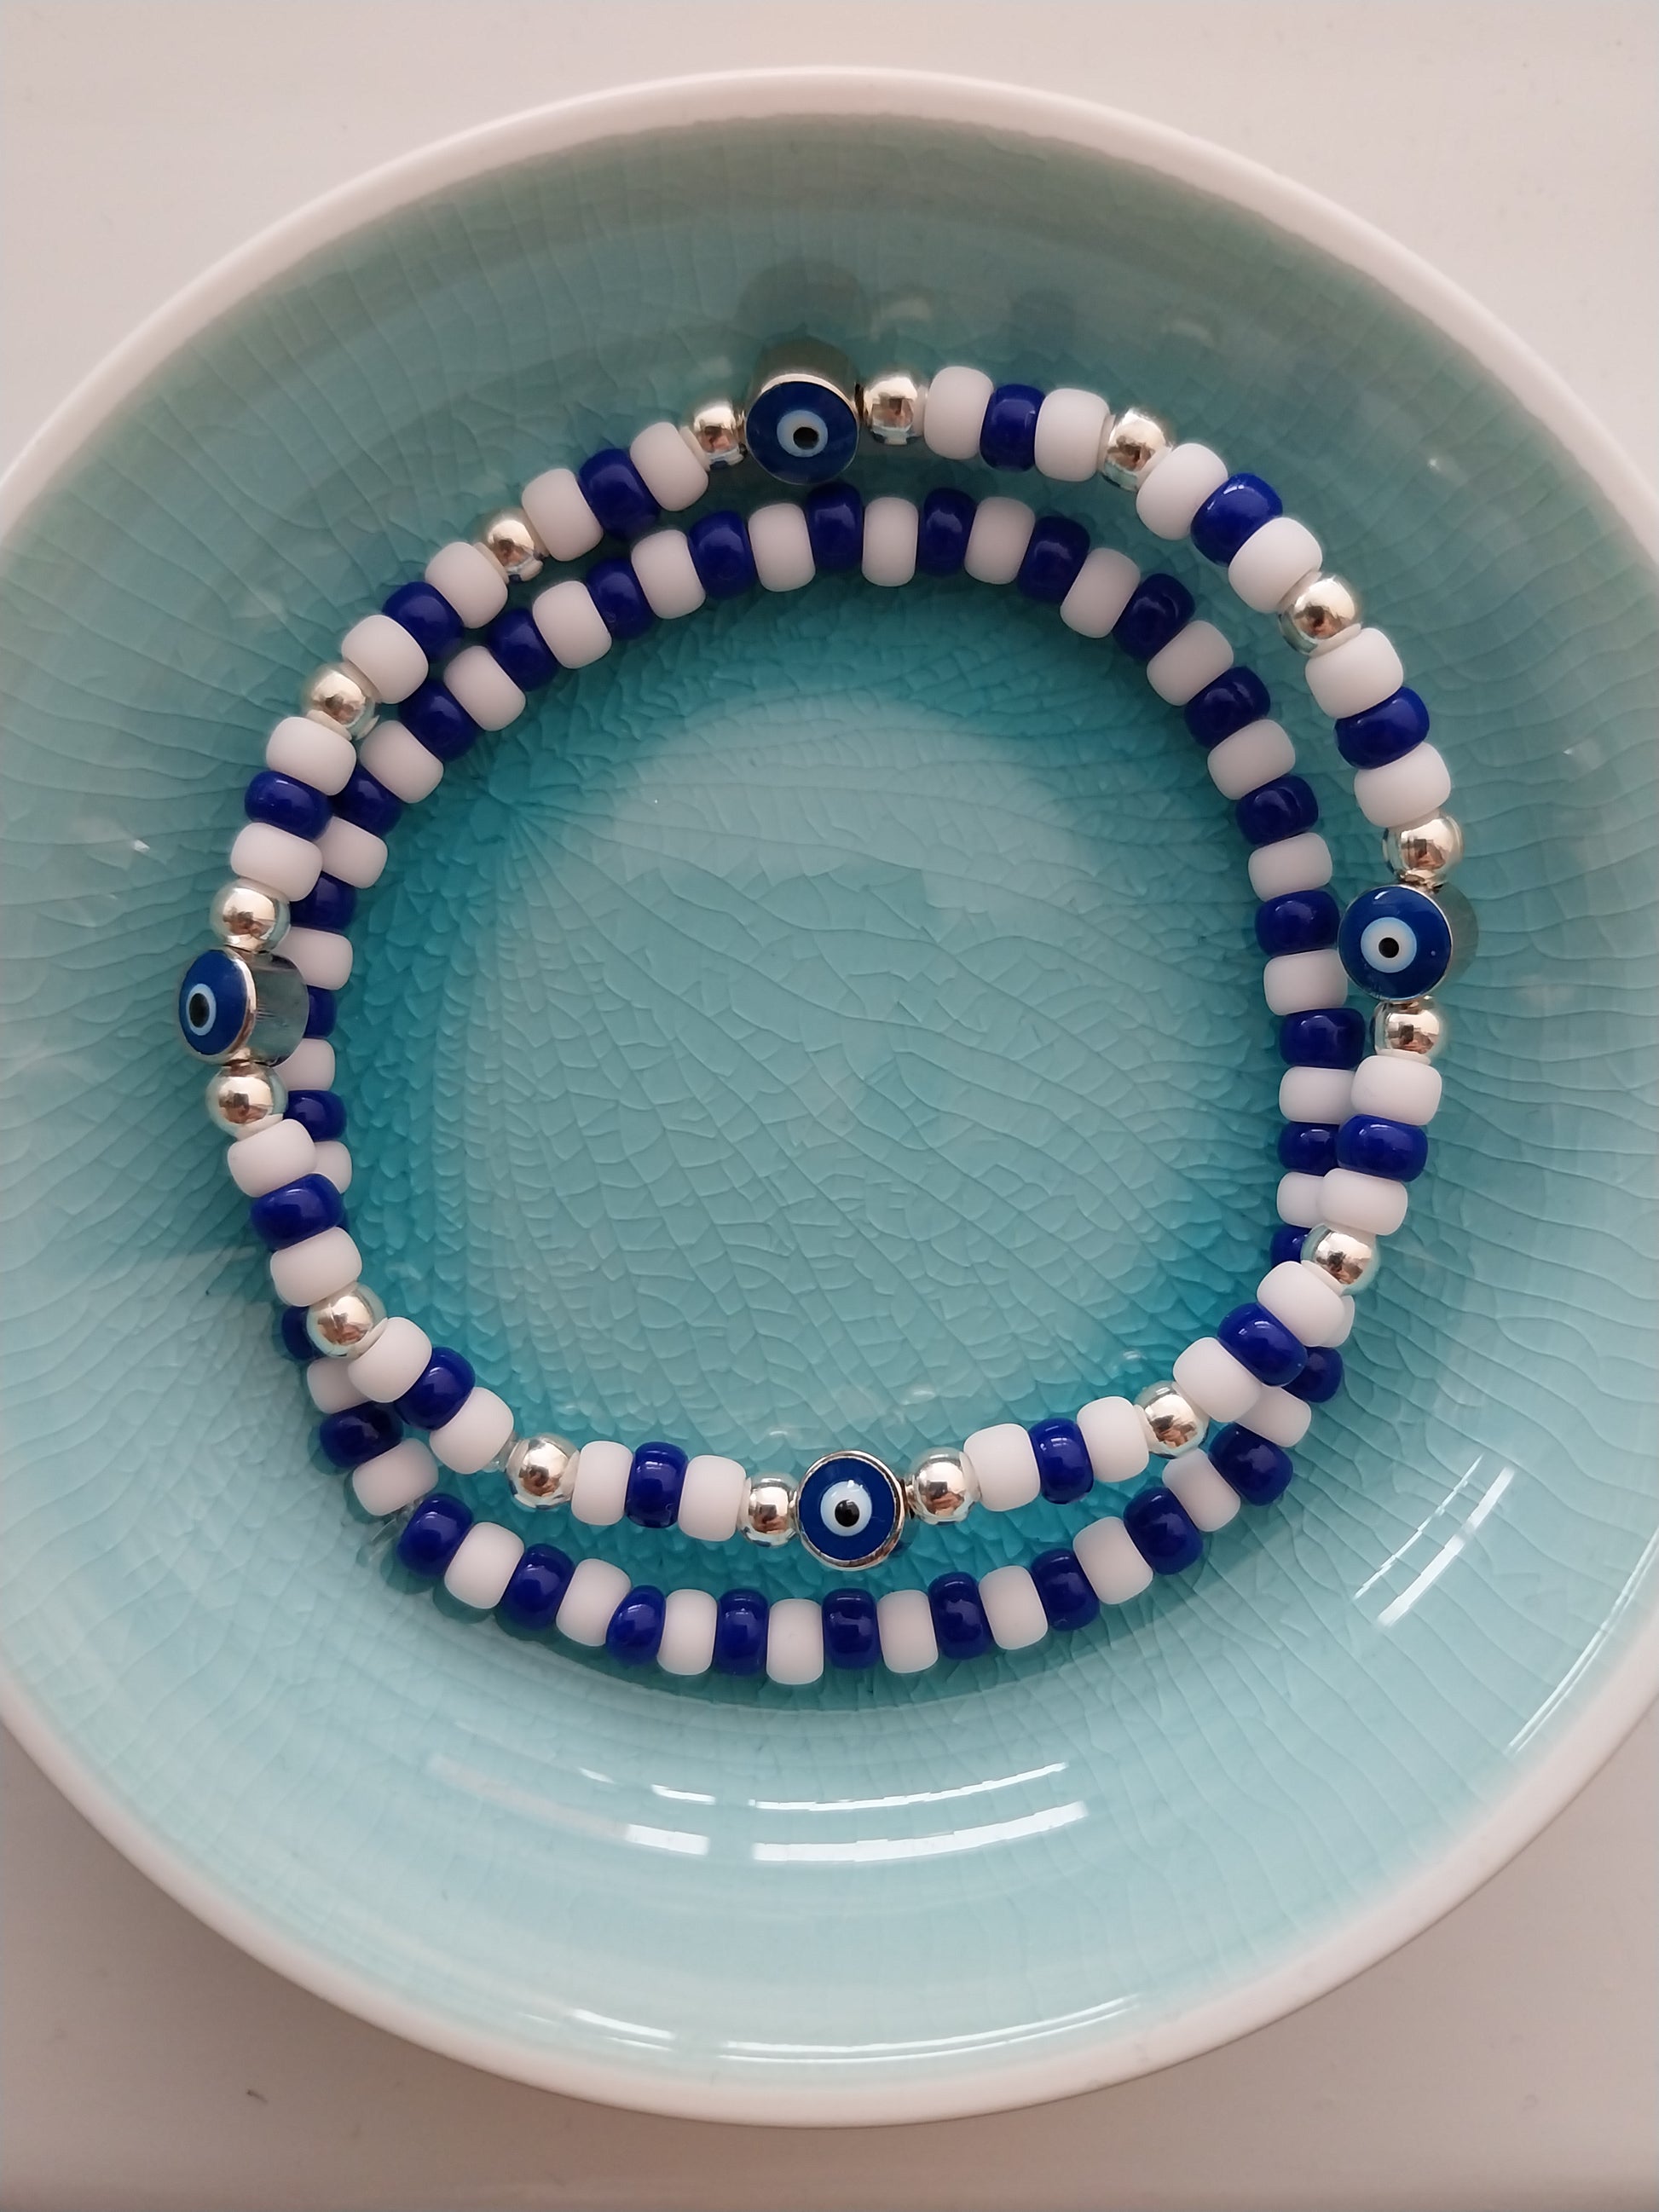 A pair of blue and white bead bracelets one of them features evil eye charm beads